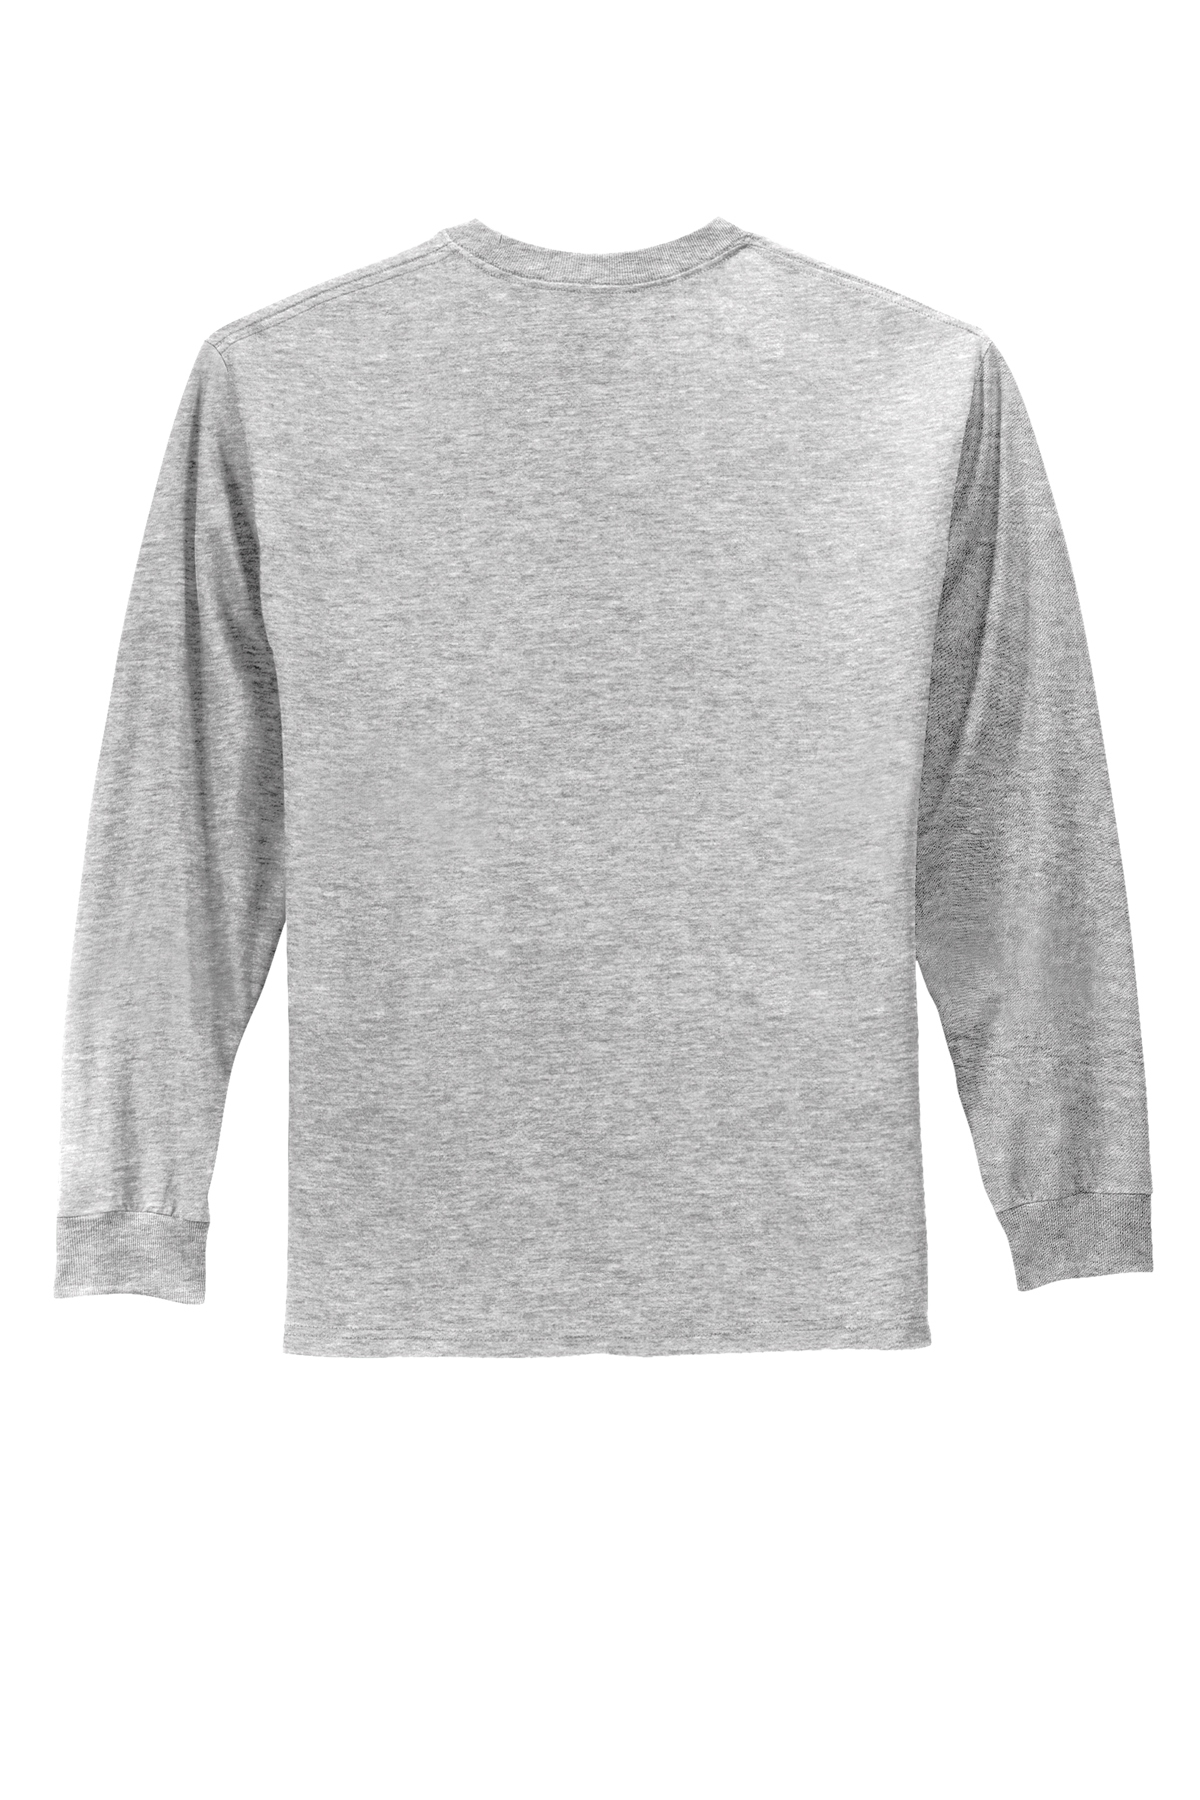 Port & Company Long Sleeve Essential Tee | Product | Company Casuals